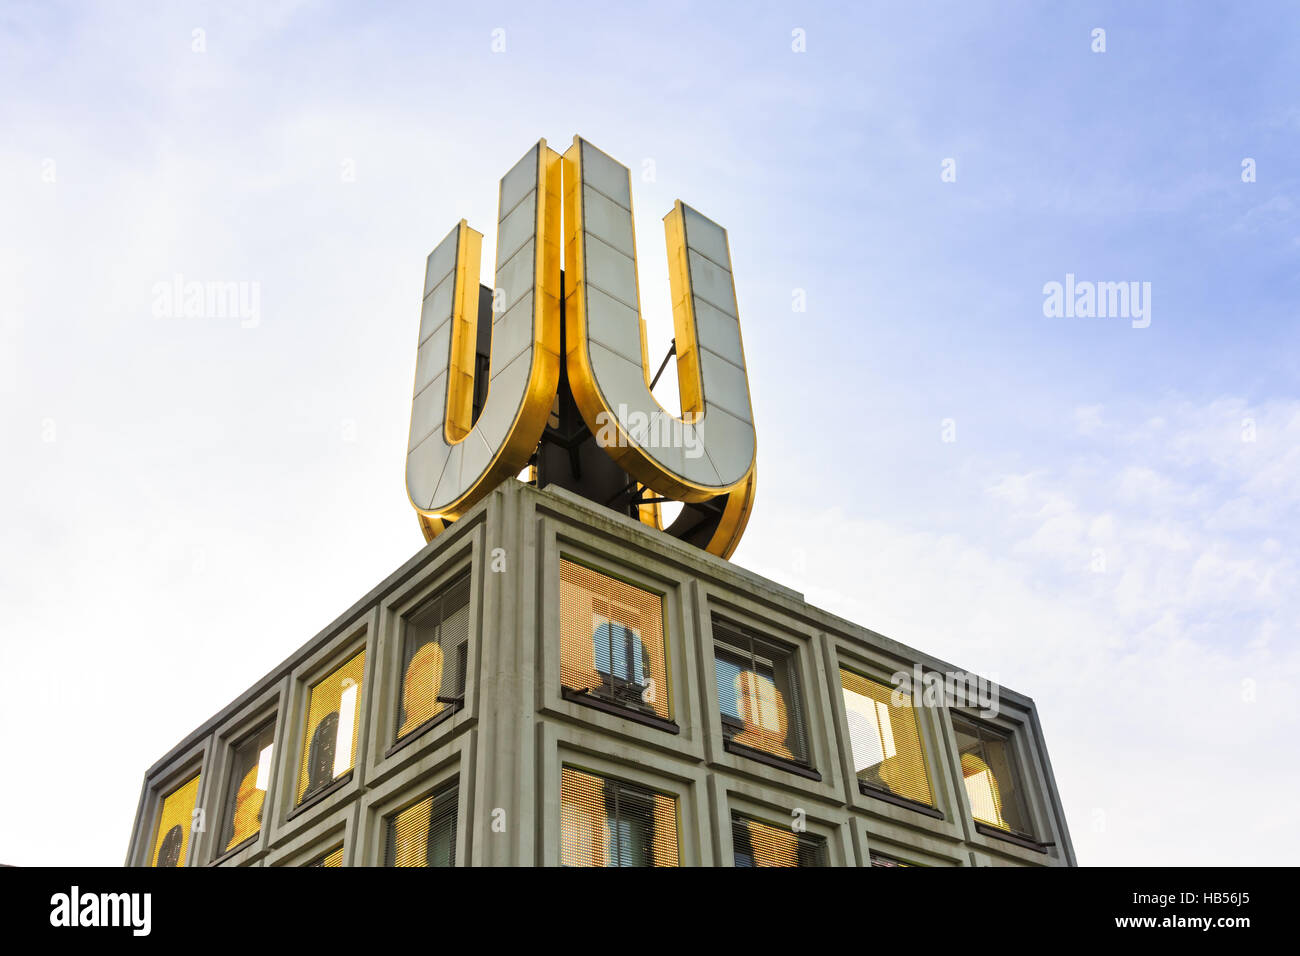 U-Tower or Dortmunder U with 'kicker'  video installation, famous sign on top of the former Dortmunder Union Brewery, Dortmund, Germany Stock Photo